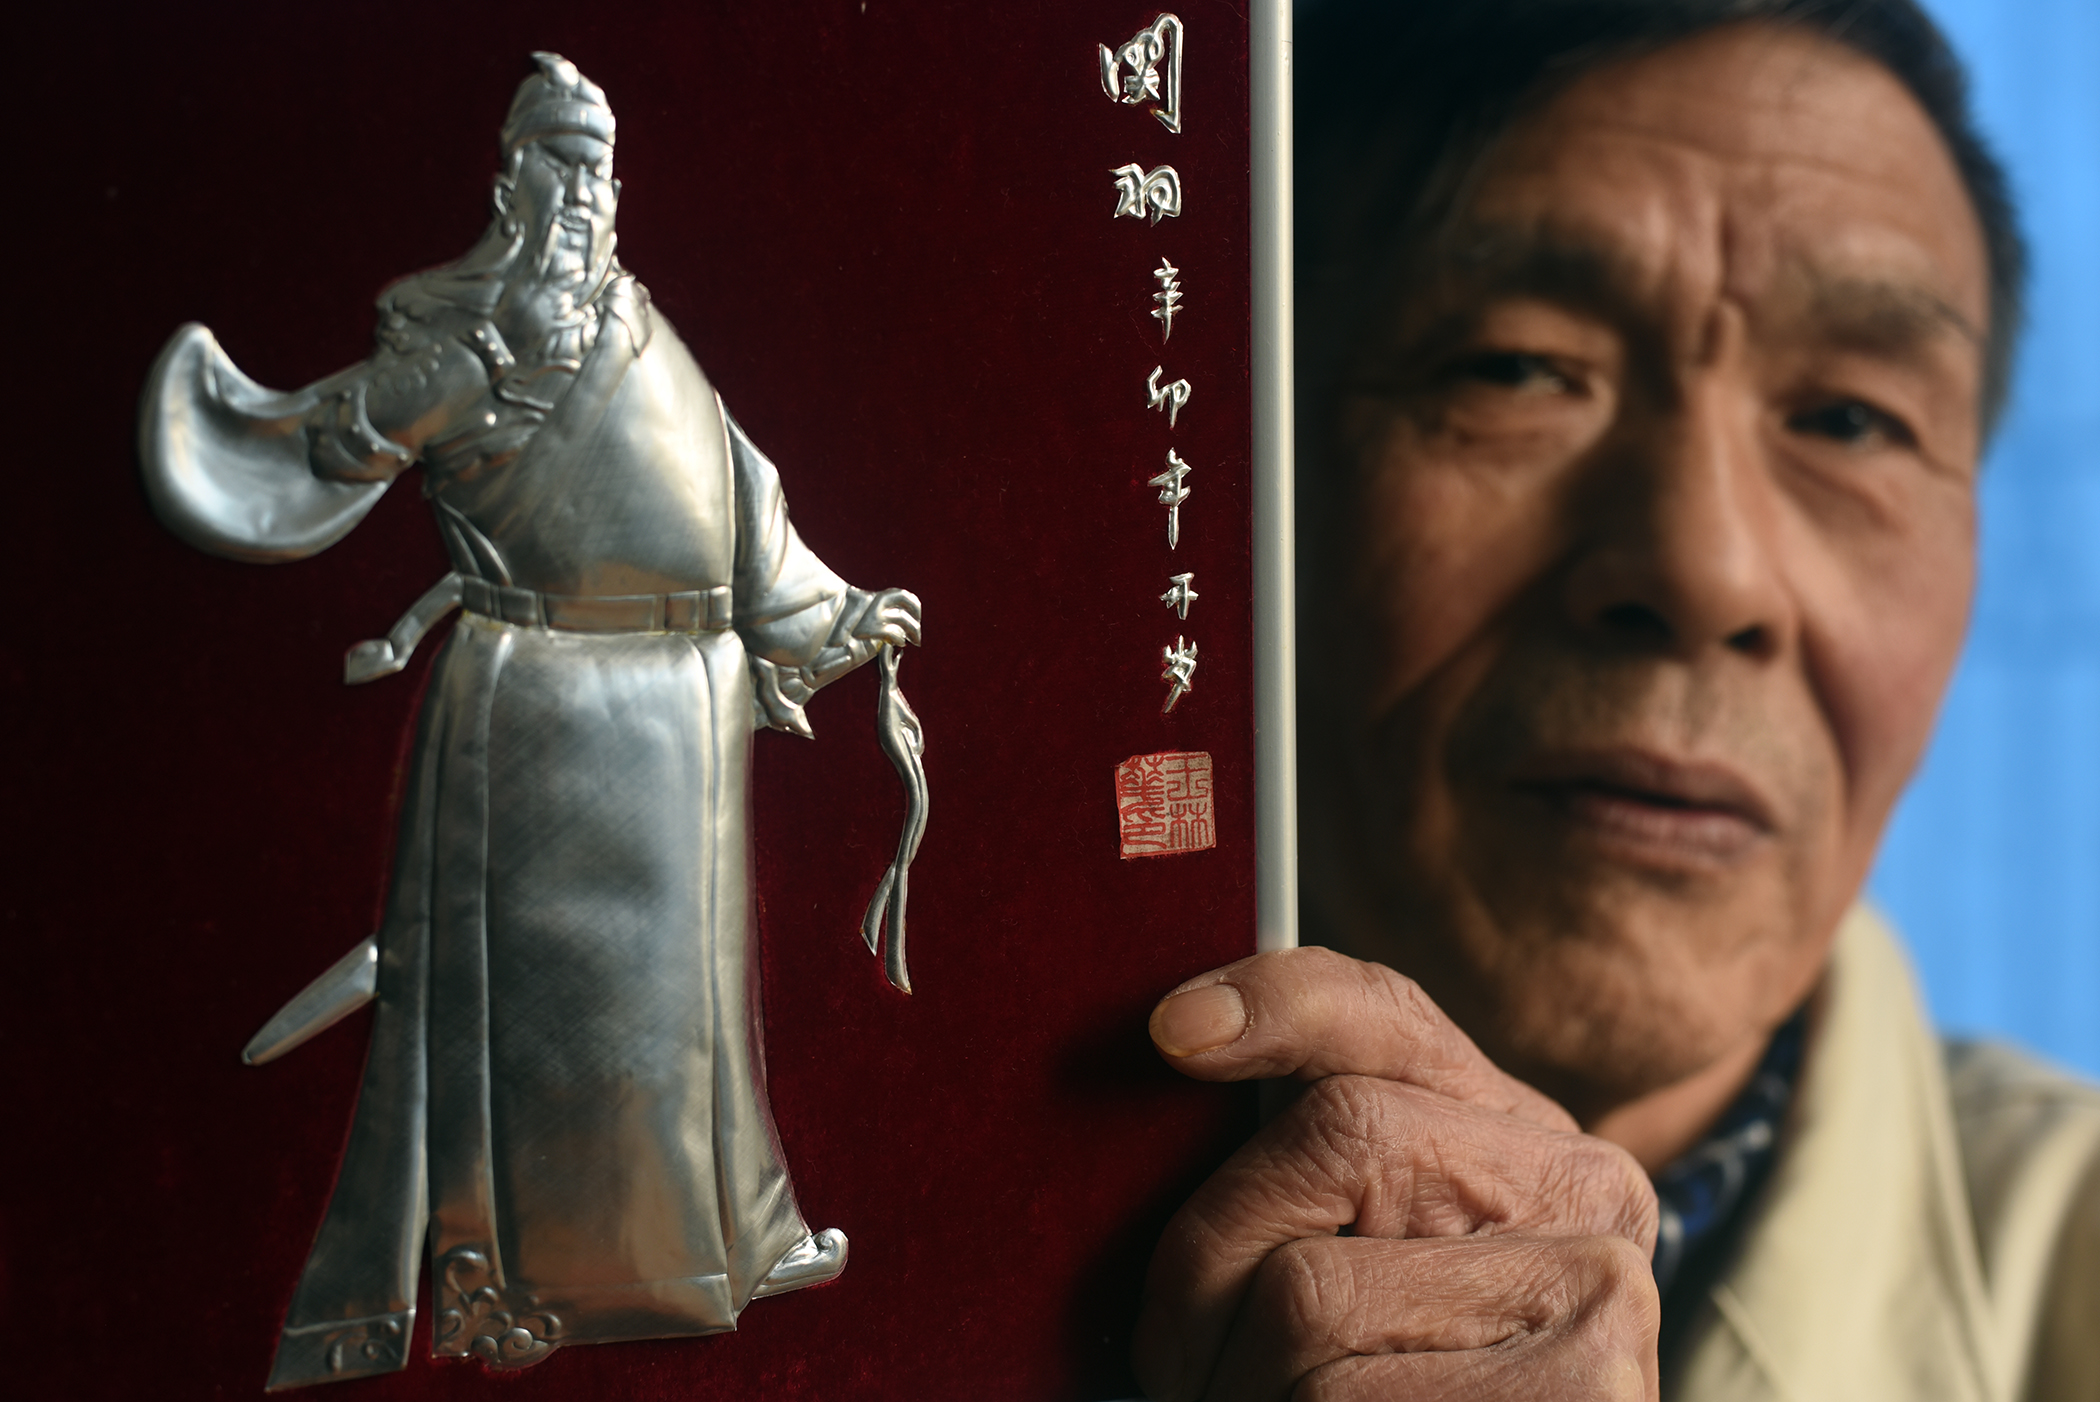  Wang Hualin, Inheritor of Intangible Culture Heritage, metalwork and egg sculpture, Jingzhou 